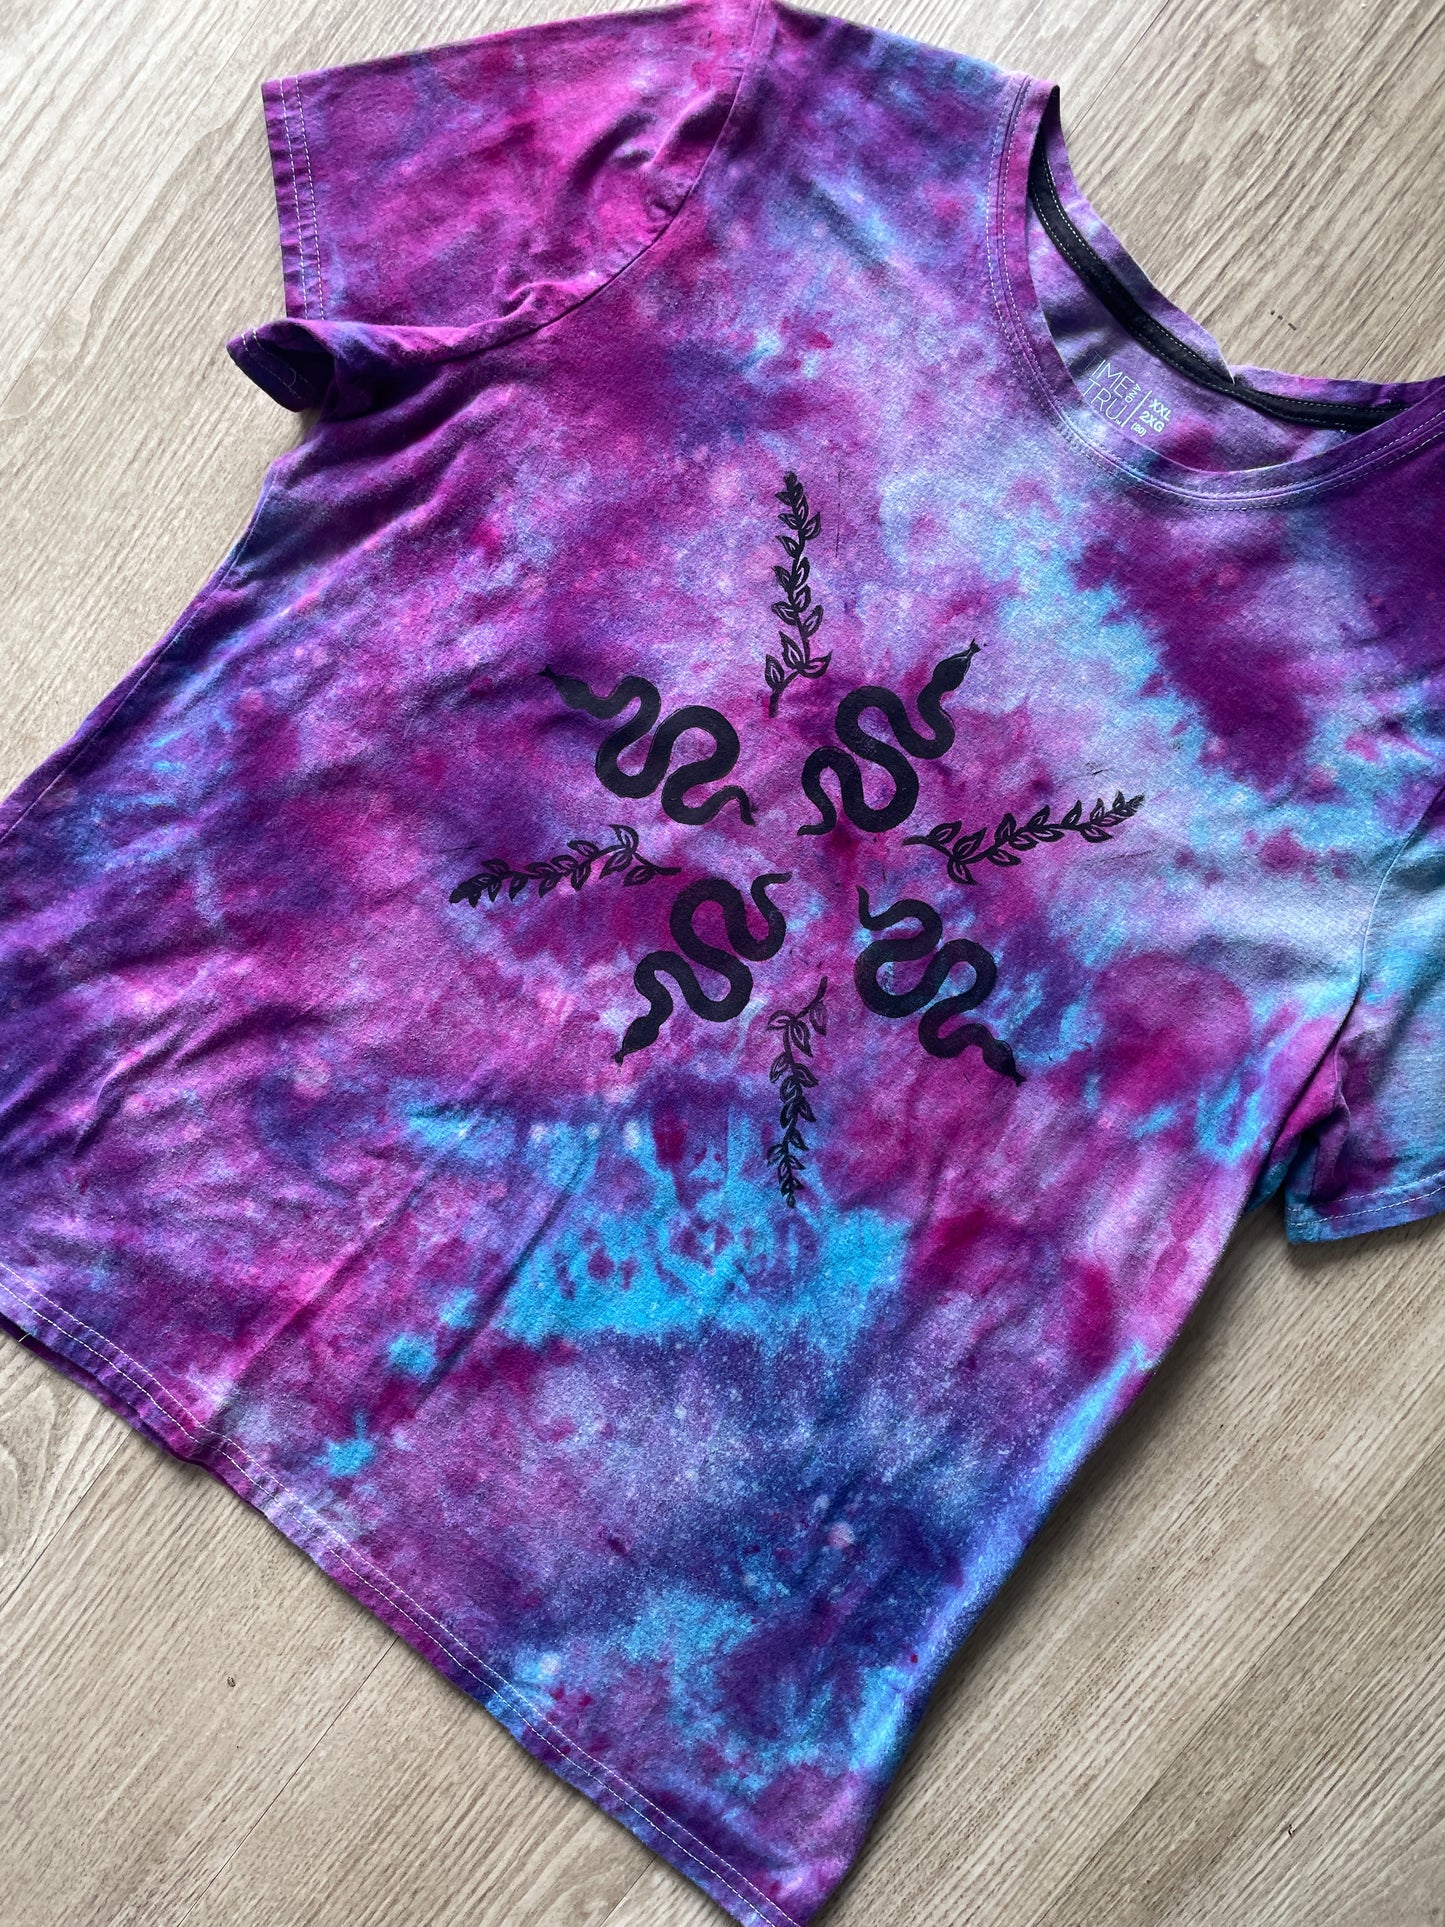 2X Juniors' Handprinted Snakes and Vines Galaxy Tie Dye Short Sleeve T-Shirt | One-Of-a-Kind Upcycled Purple, Pink, and Blue Ice Dye Top